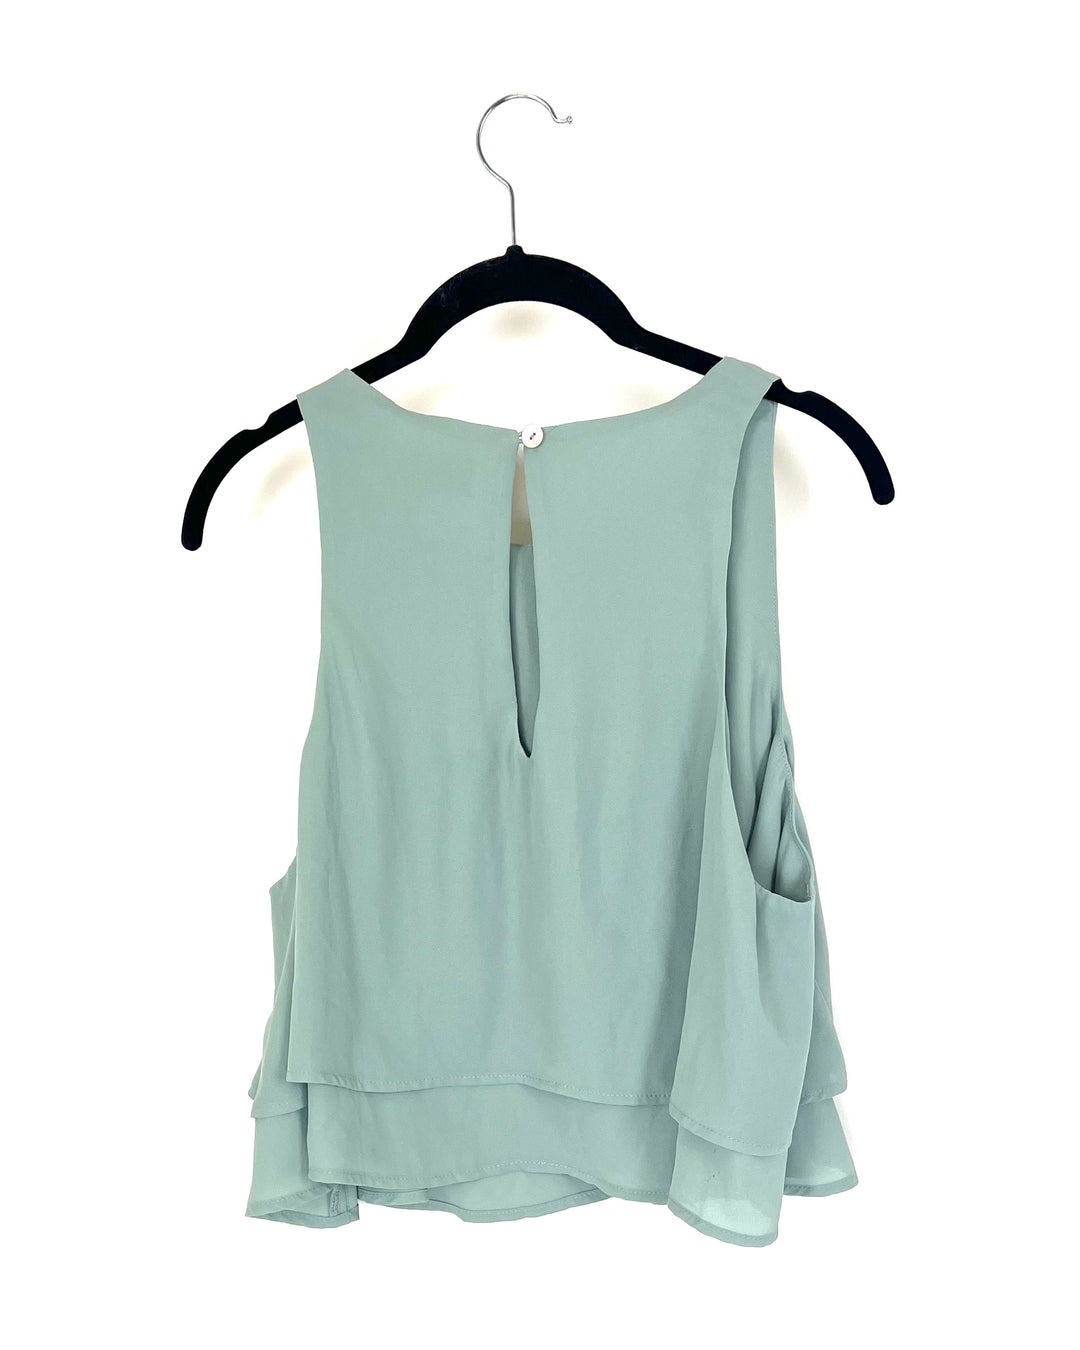 Muted Teal Sleeveless Cropped Blouse - Extra Large